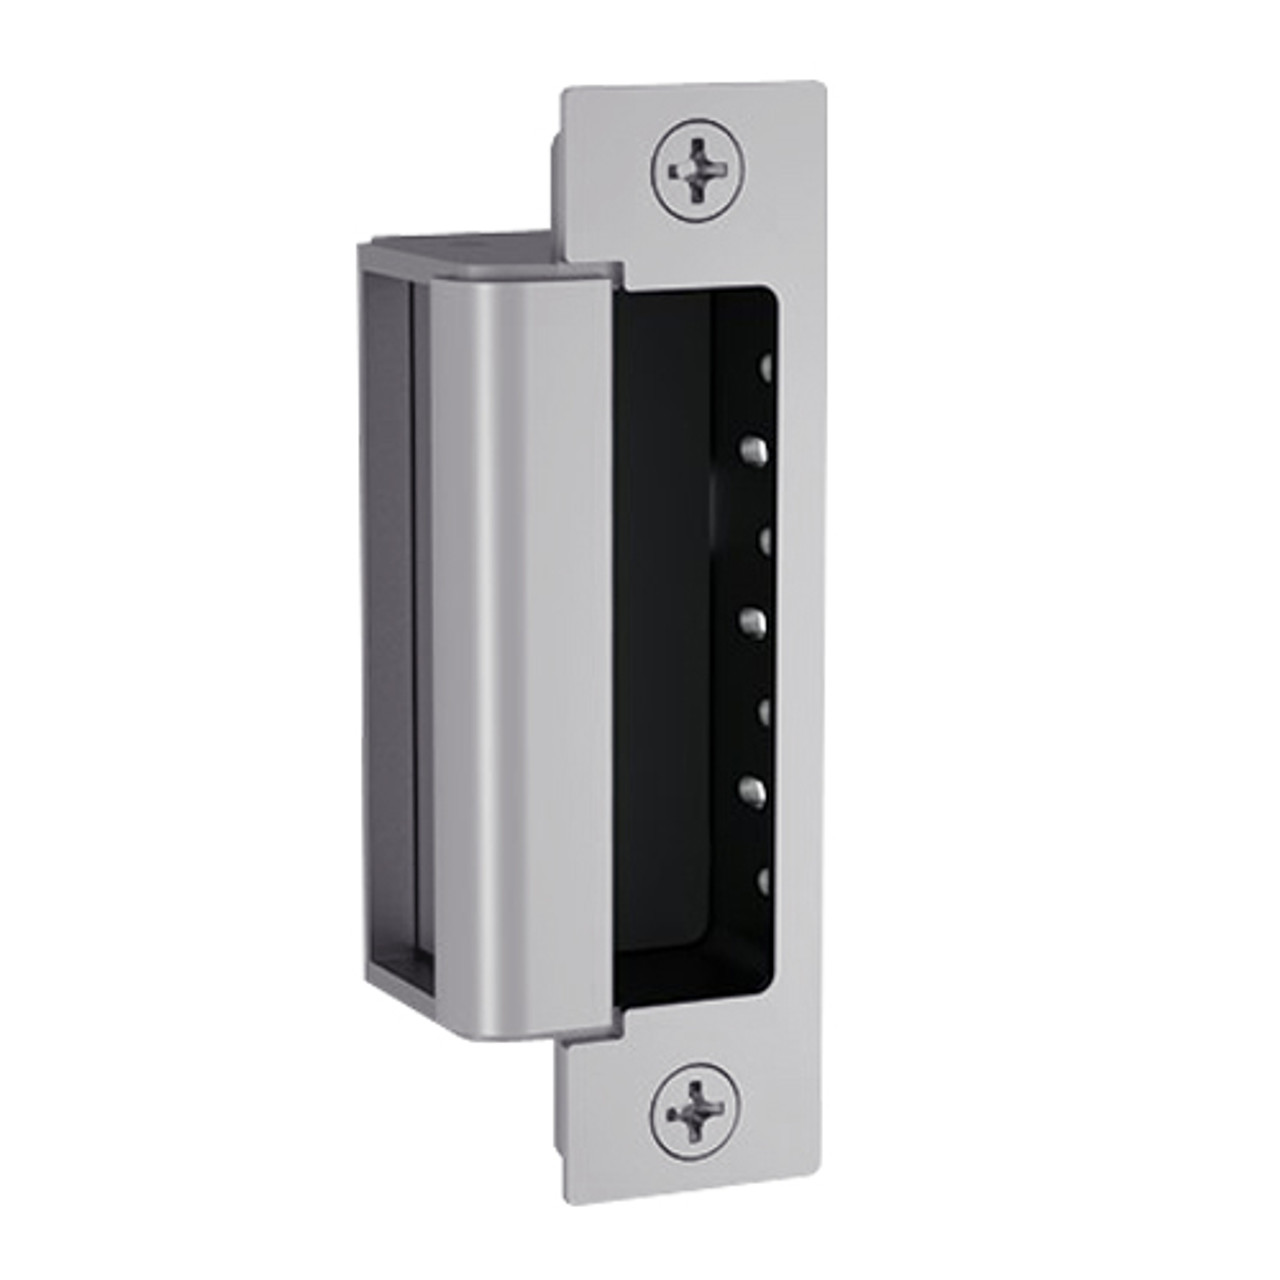 1600-CLB-DLM-630 Hes 1600 Series Dynamic Low Profile Electric Strike for Latchbolt Lock with Dual Lock Monitor in Satin Stainless Steel